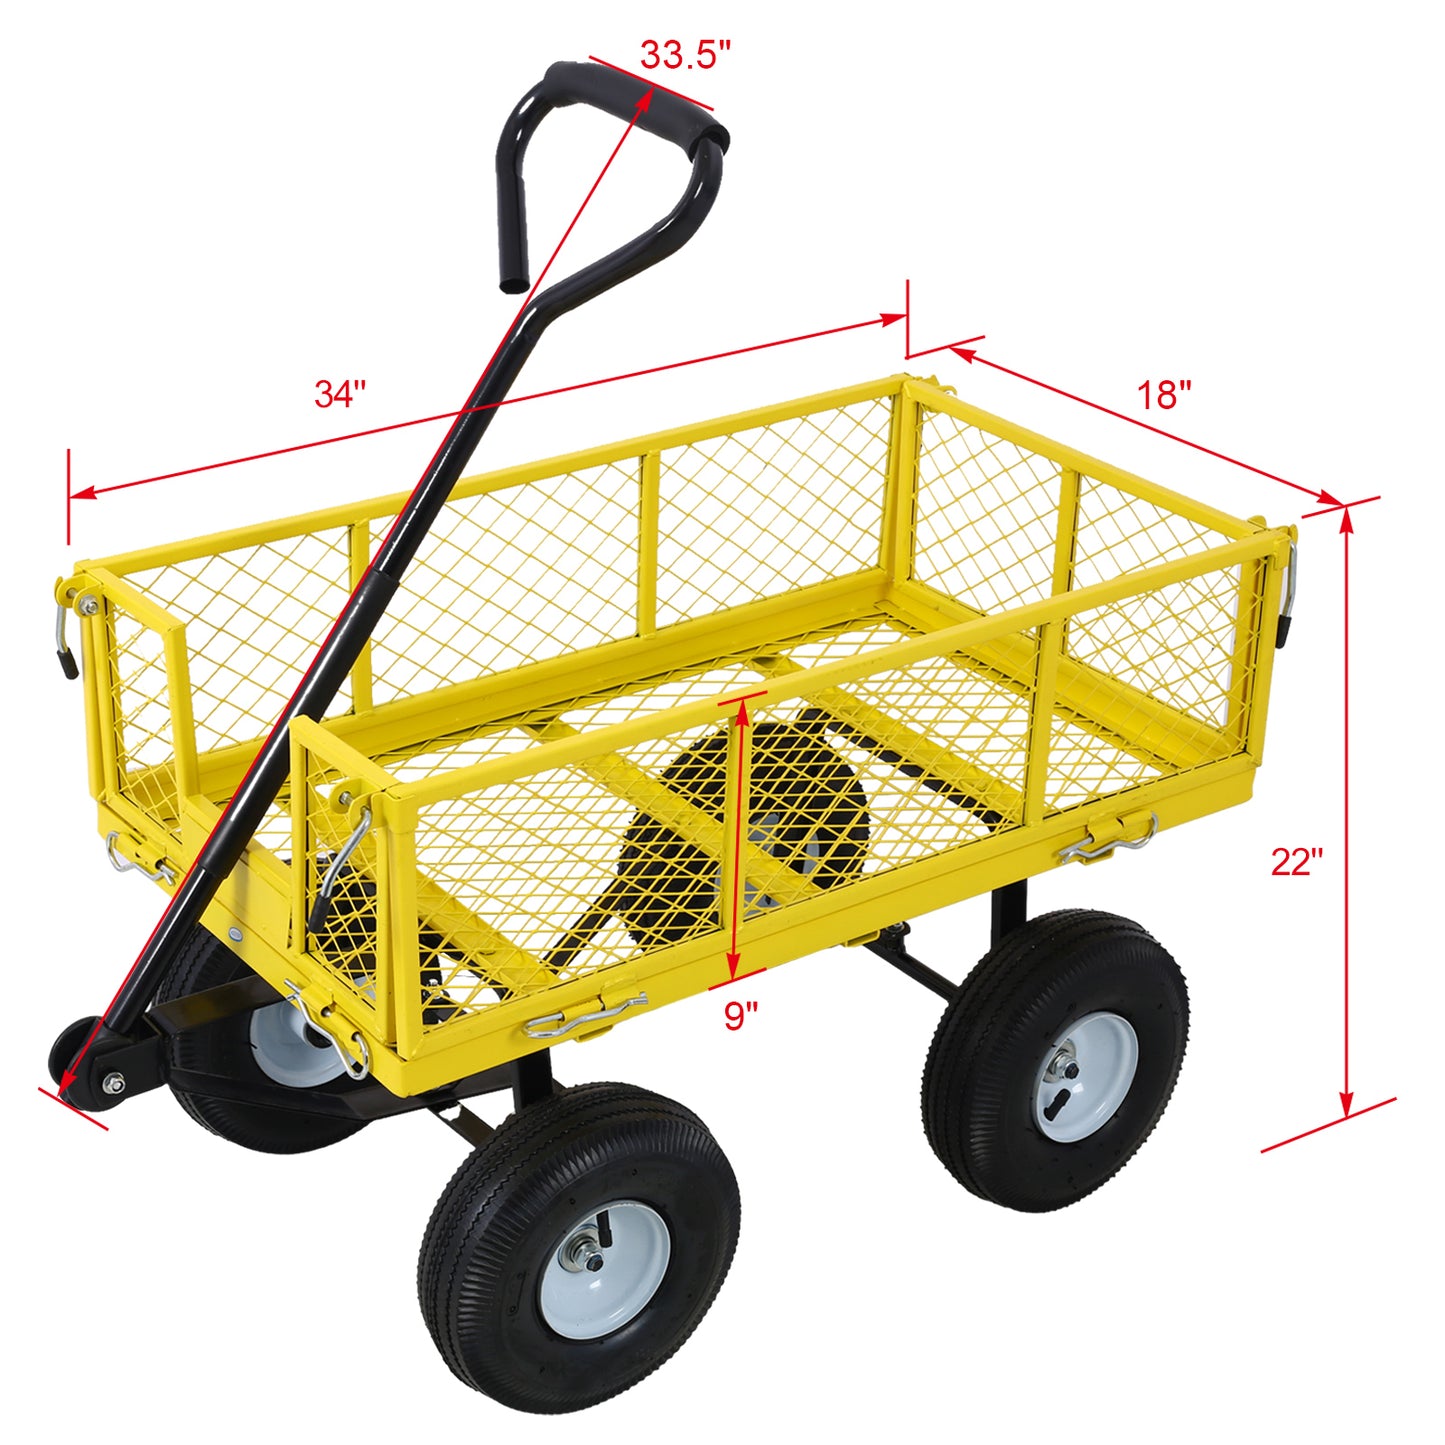 Steel Garden Cart, Steel Mesh Removable Sides, 3 cu ft, 550 lb Capacity, Yellow